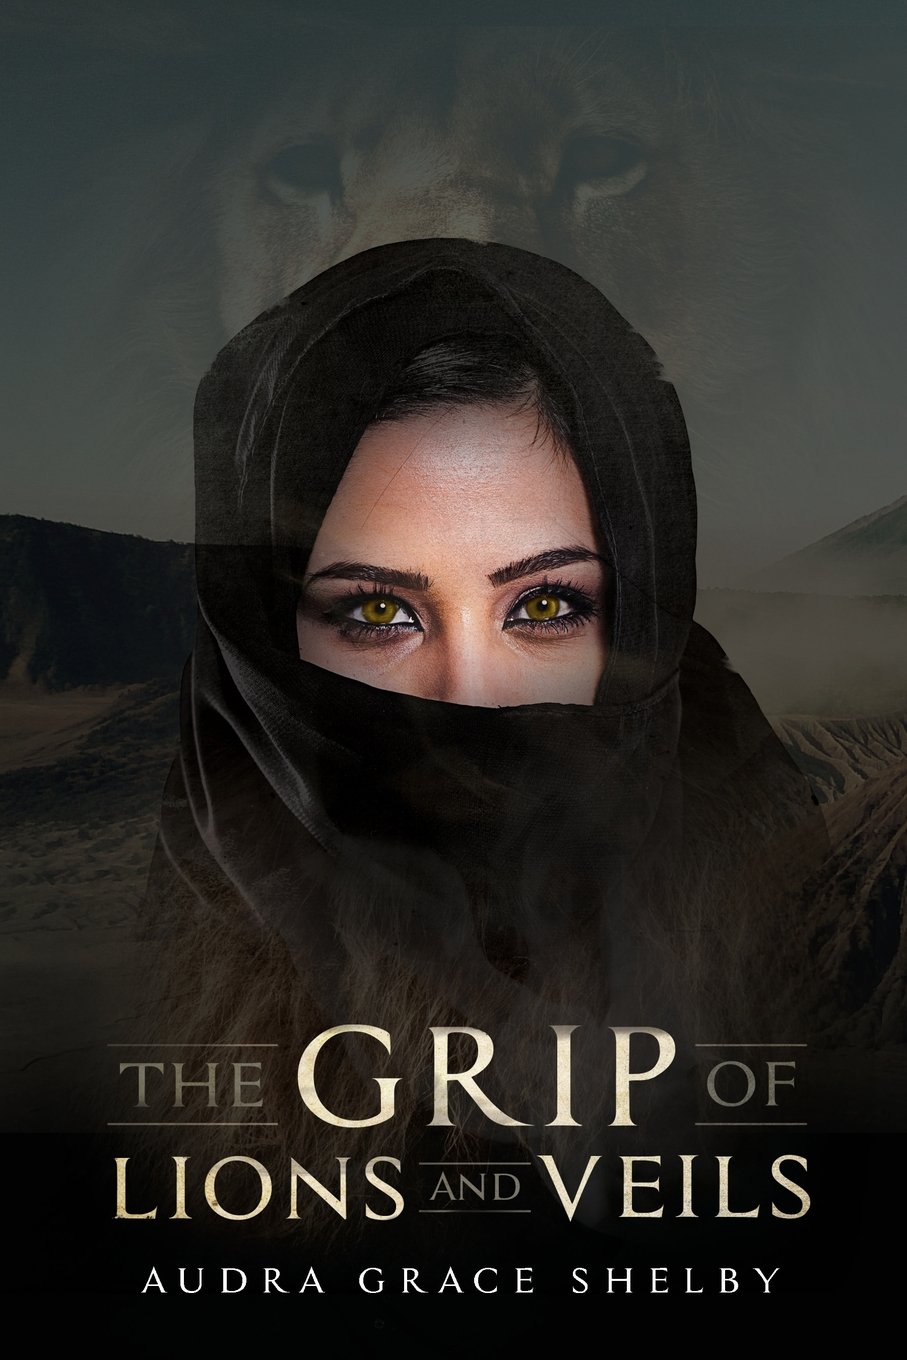 The Grip of Lions and Veils